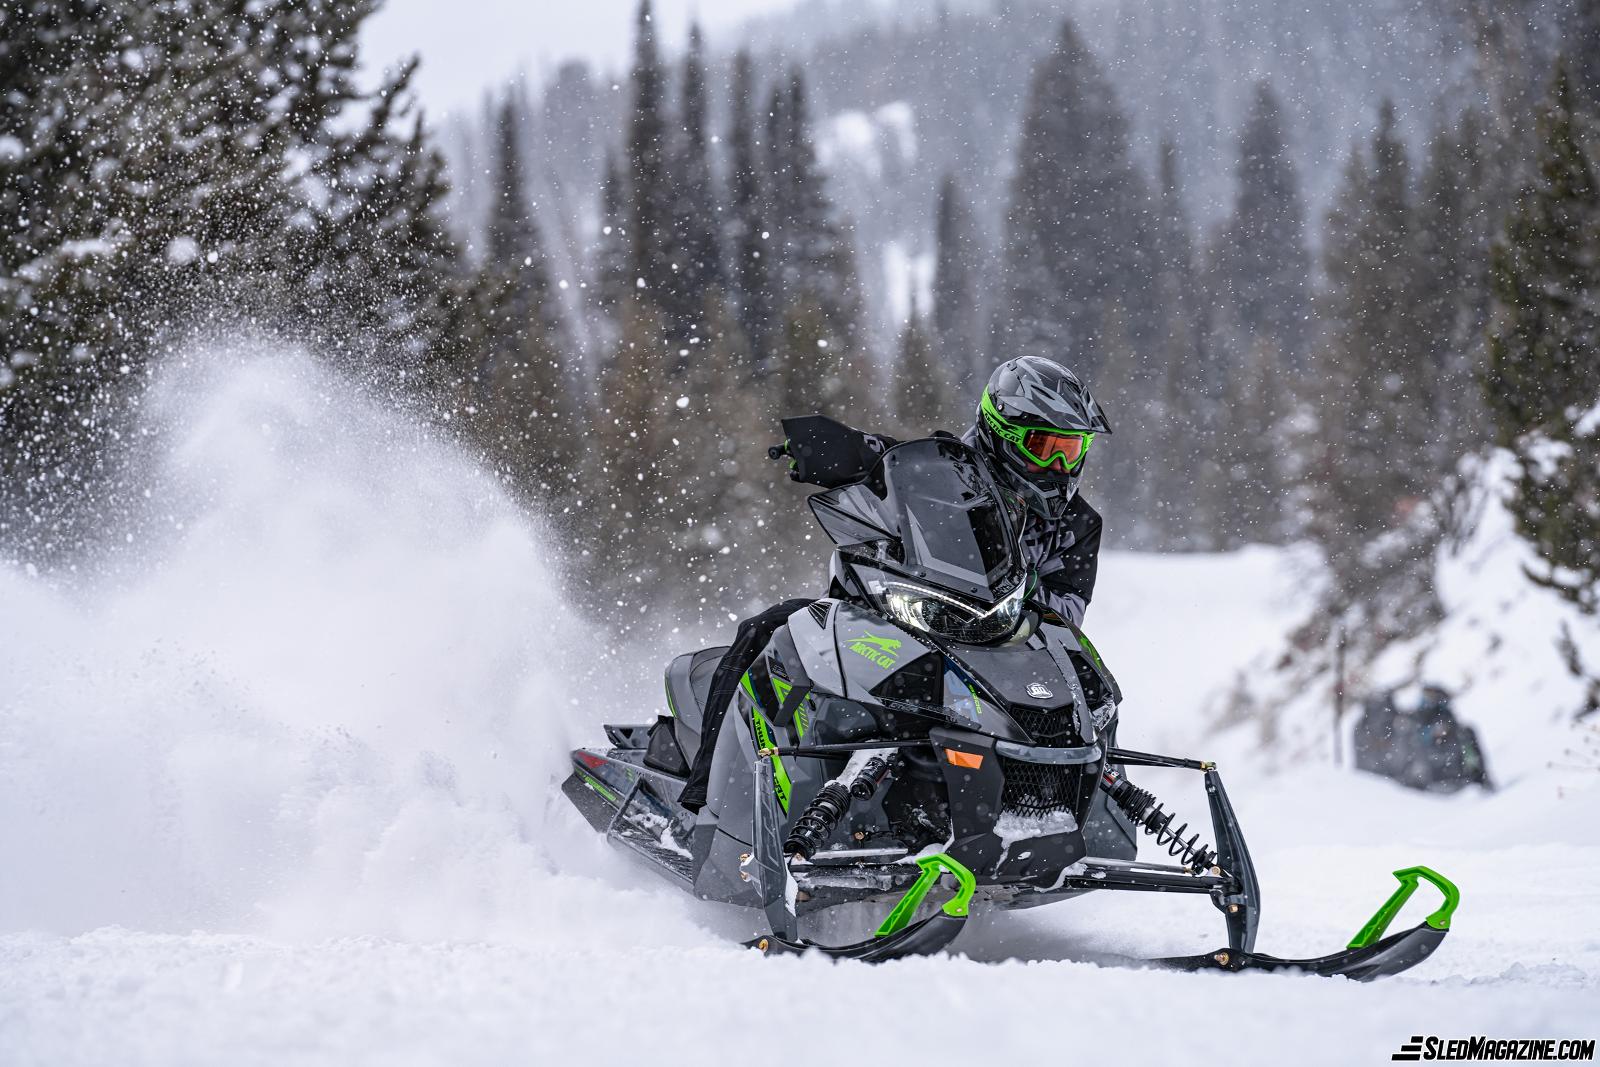 Overview of the highlights of the 2022 Arctic Cat snowmobile lineup